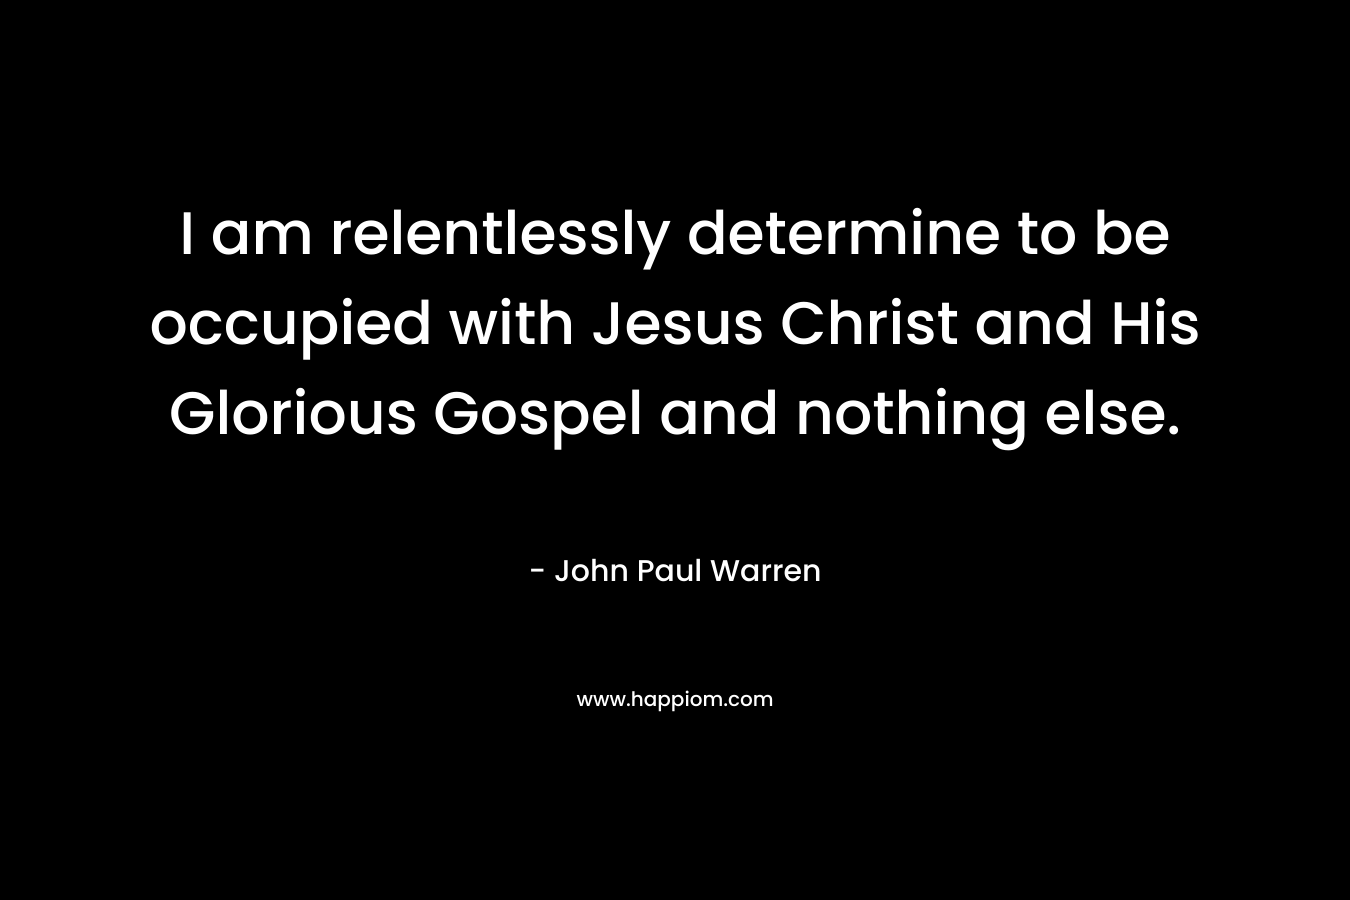 I am relentlessly determine to be occupied with Jesus Christ and His Glorious Gospel and nothing else. – John Paul Warren